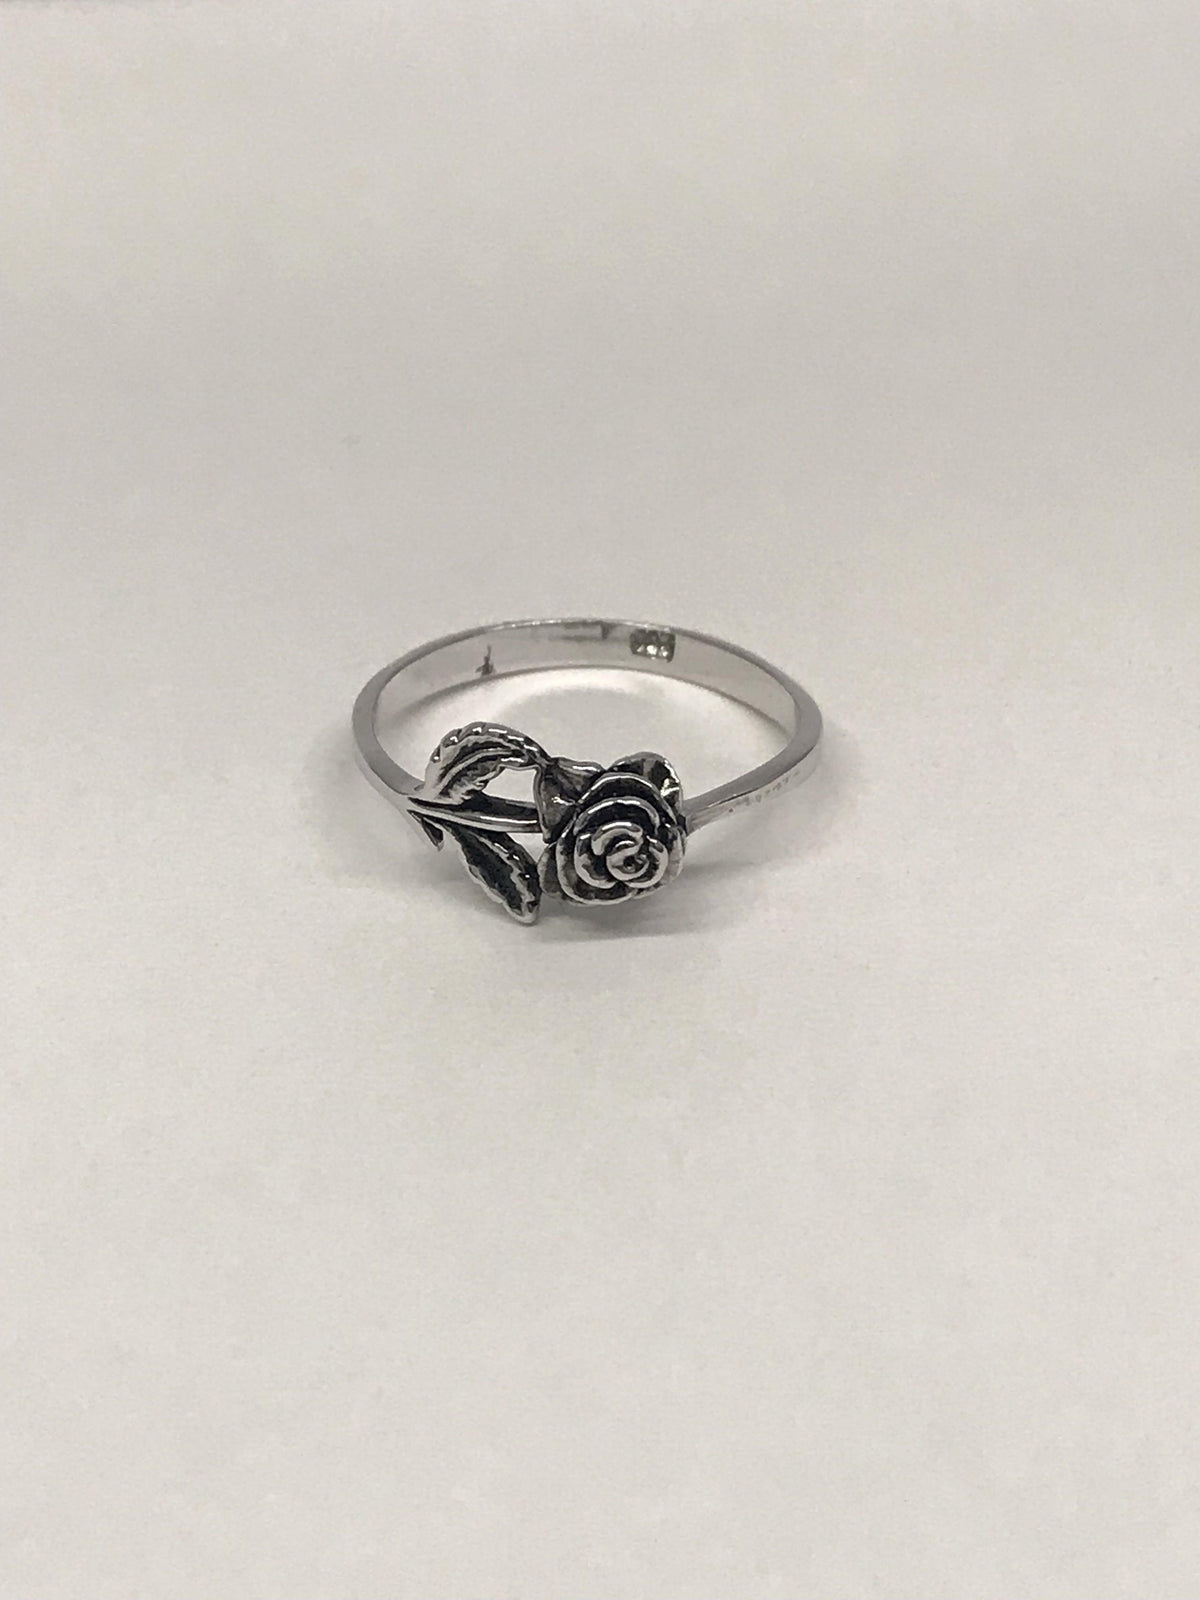 Rose Flower .925 Sterling Silver Ring - Hers and His Treasures